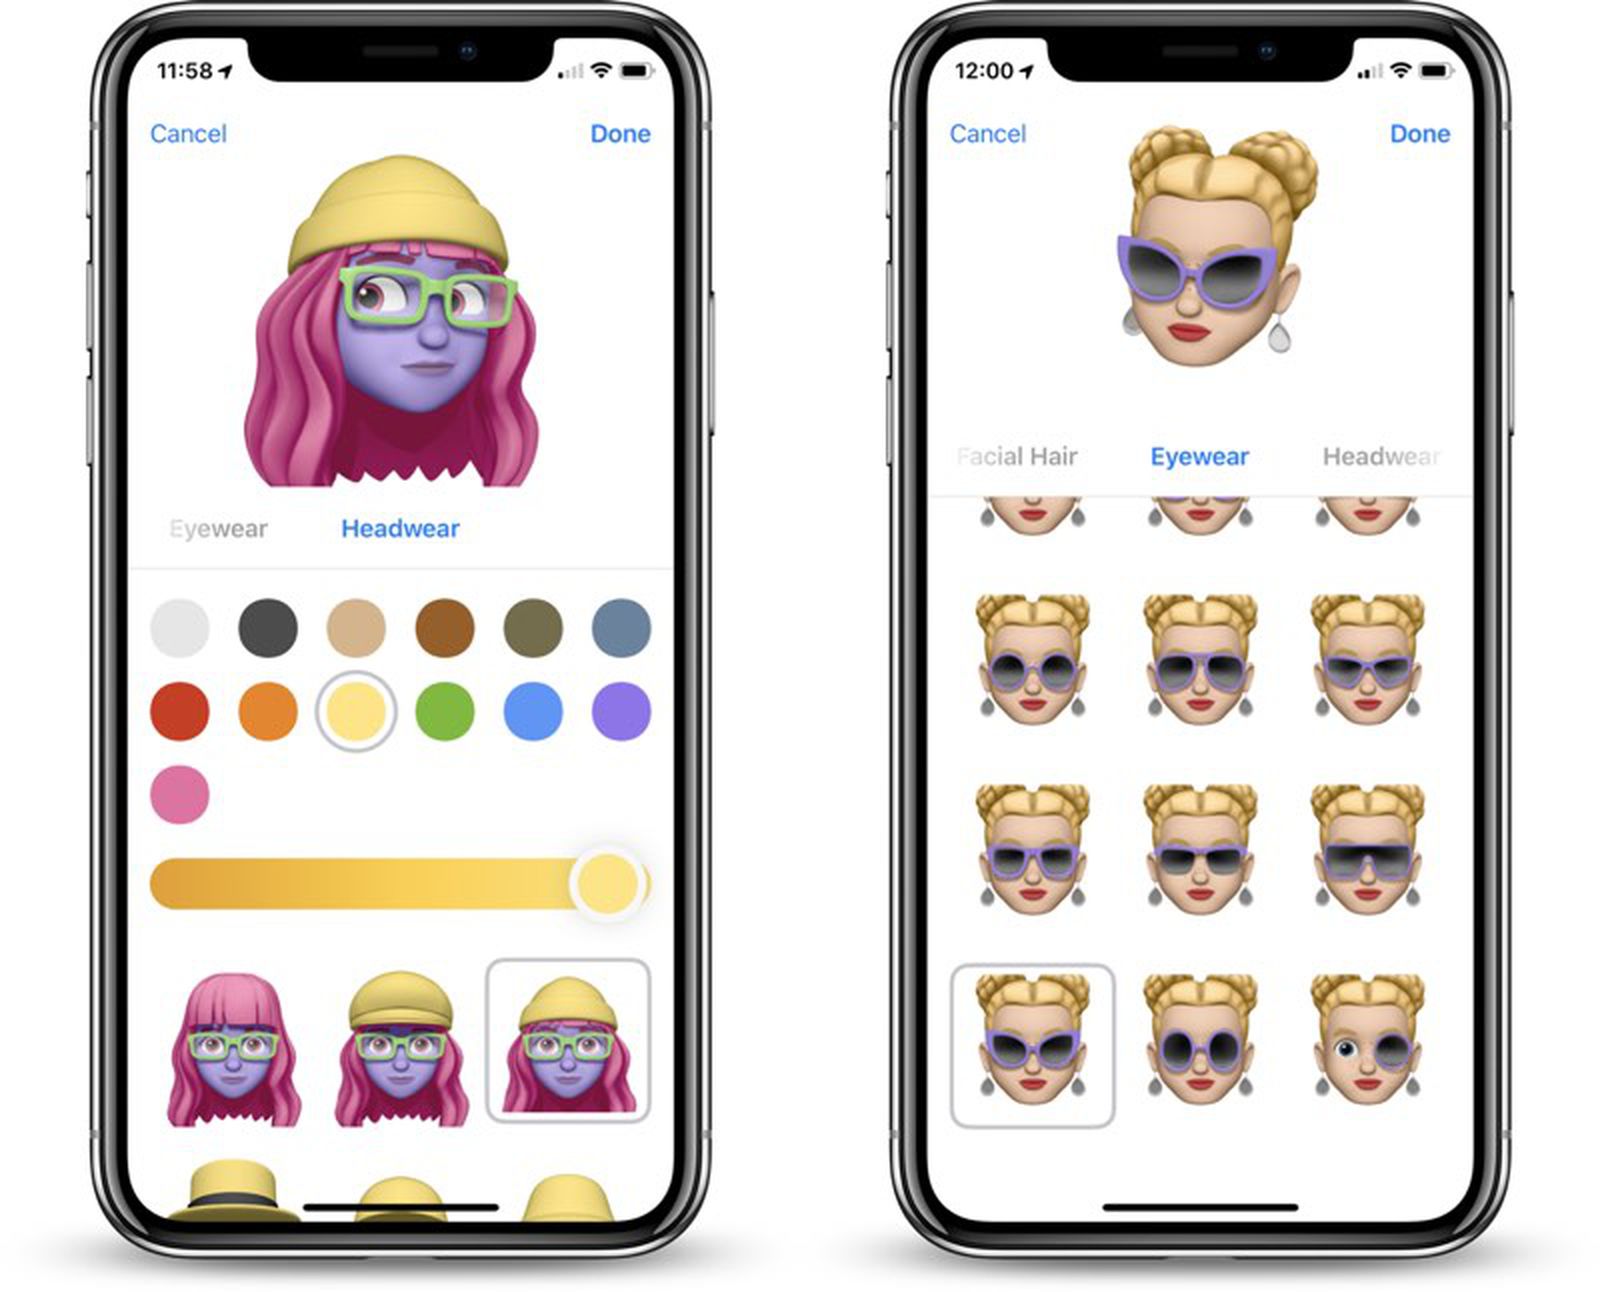 personalized-character-icons-creating-resembling-avatars-on-iphone-10